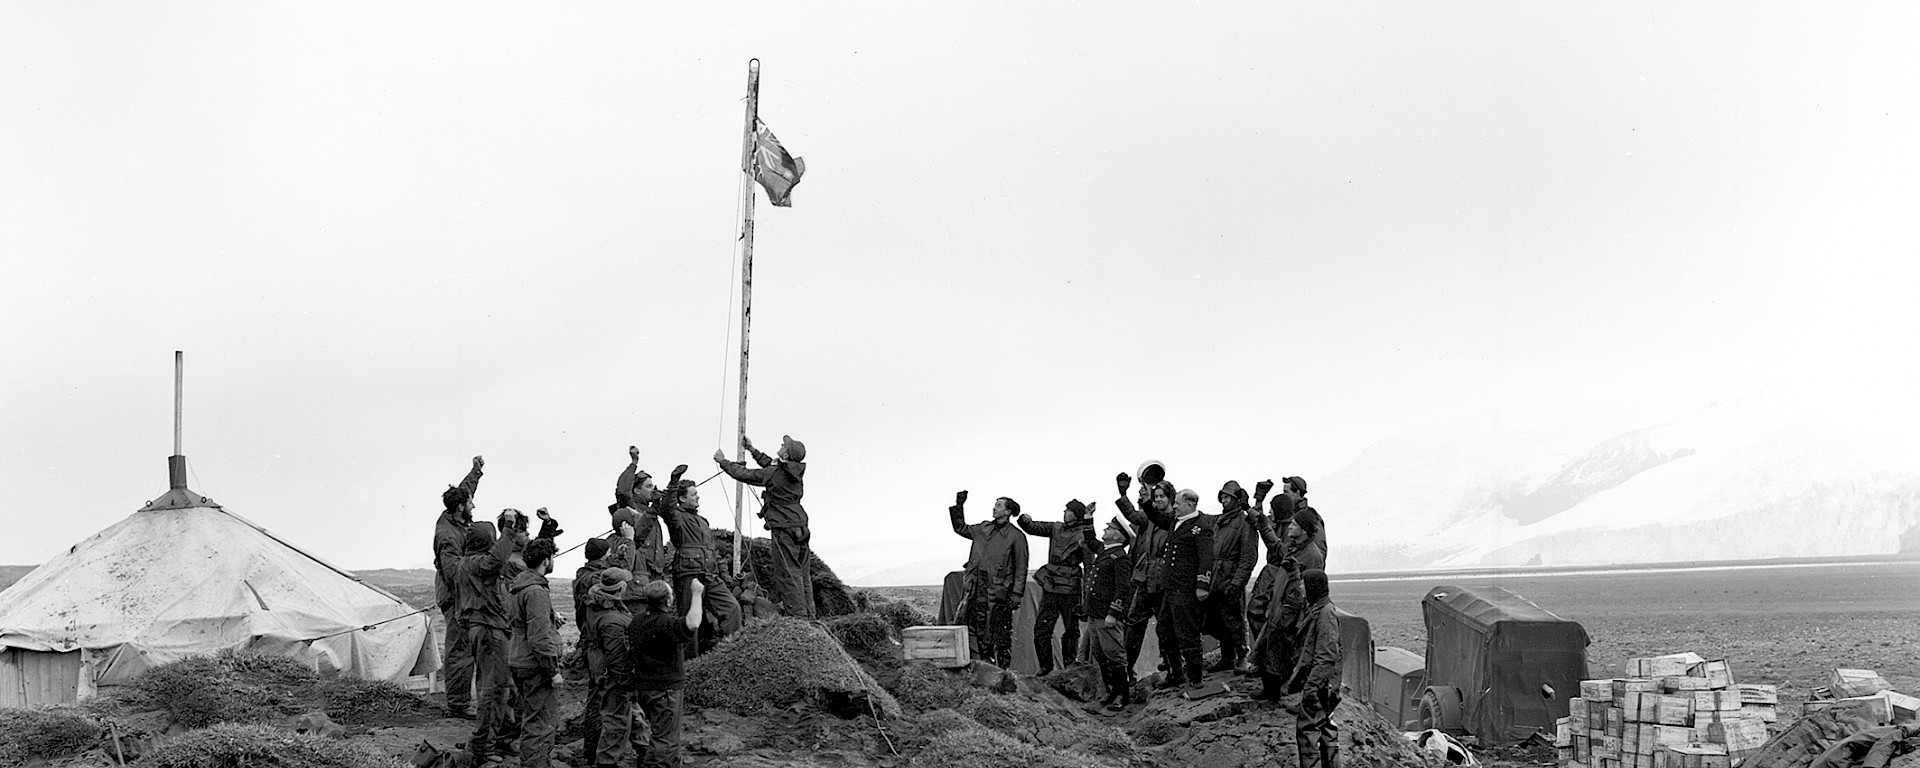 A man raises the flag in a black and white photo.